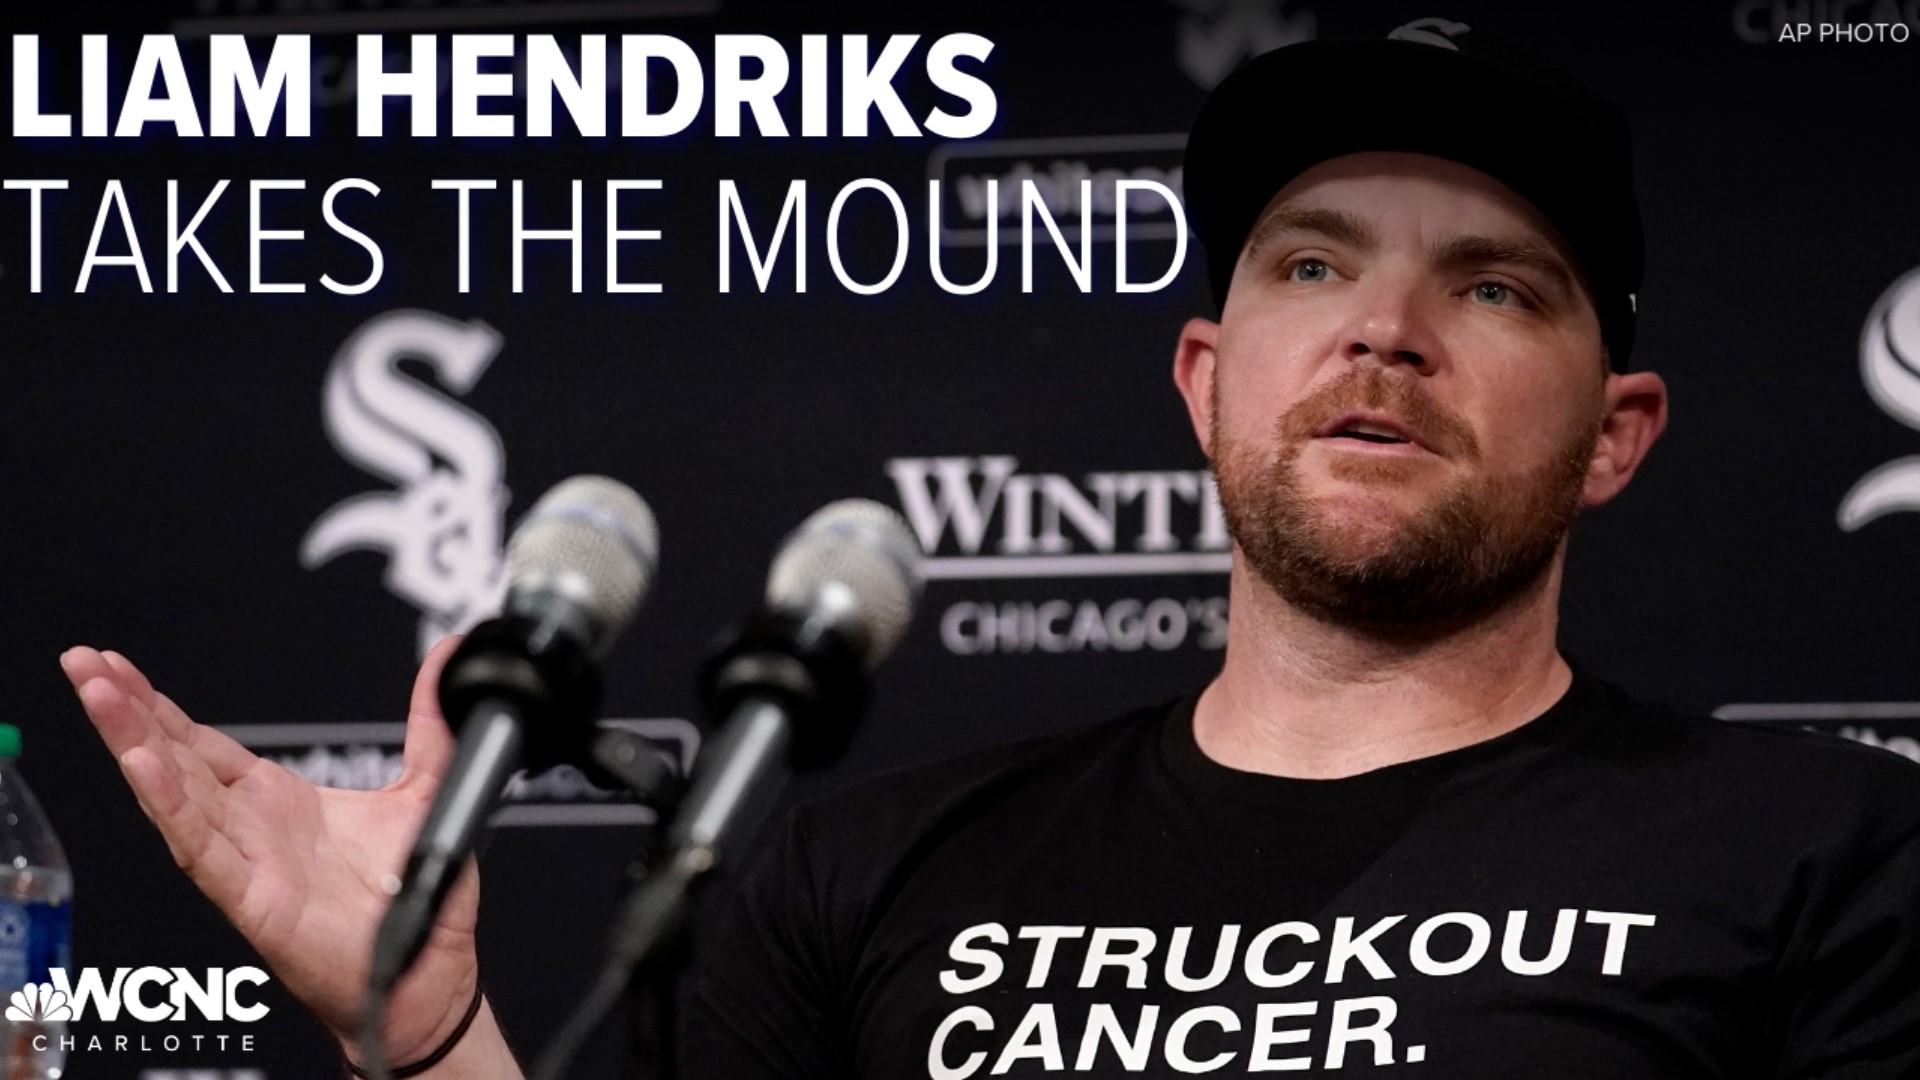 Liam Hendriks returned to the mound for the Charlotte Knights after striking out cancer just a few weeks ago and proved why he's a former All-Star pitcher.